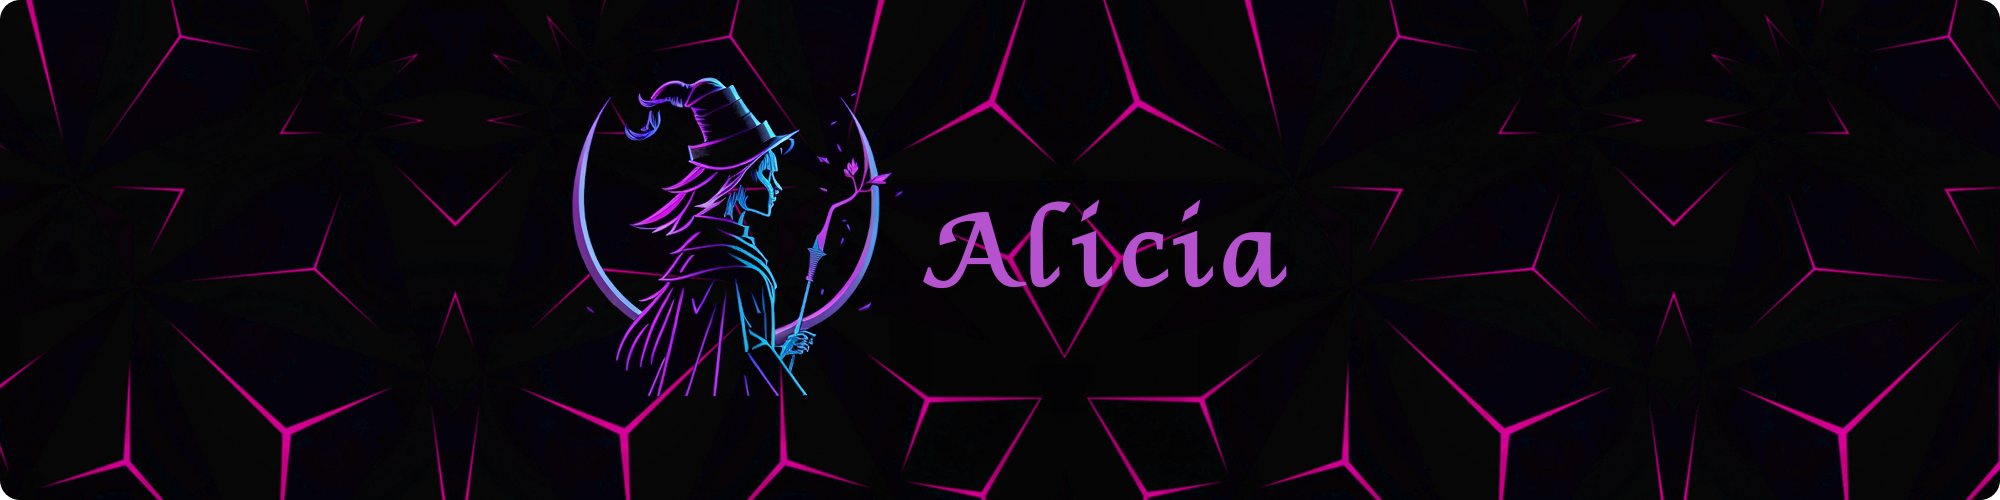 alicia-banner.png